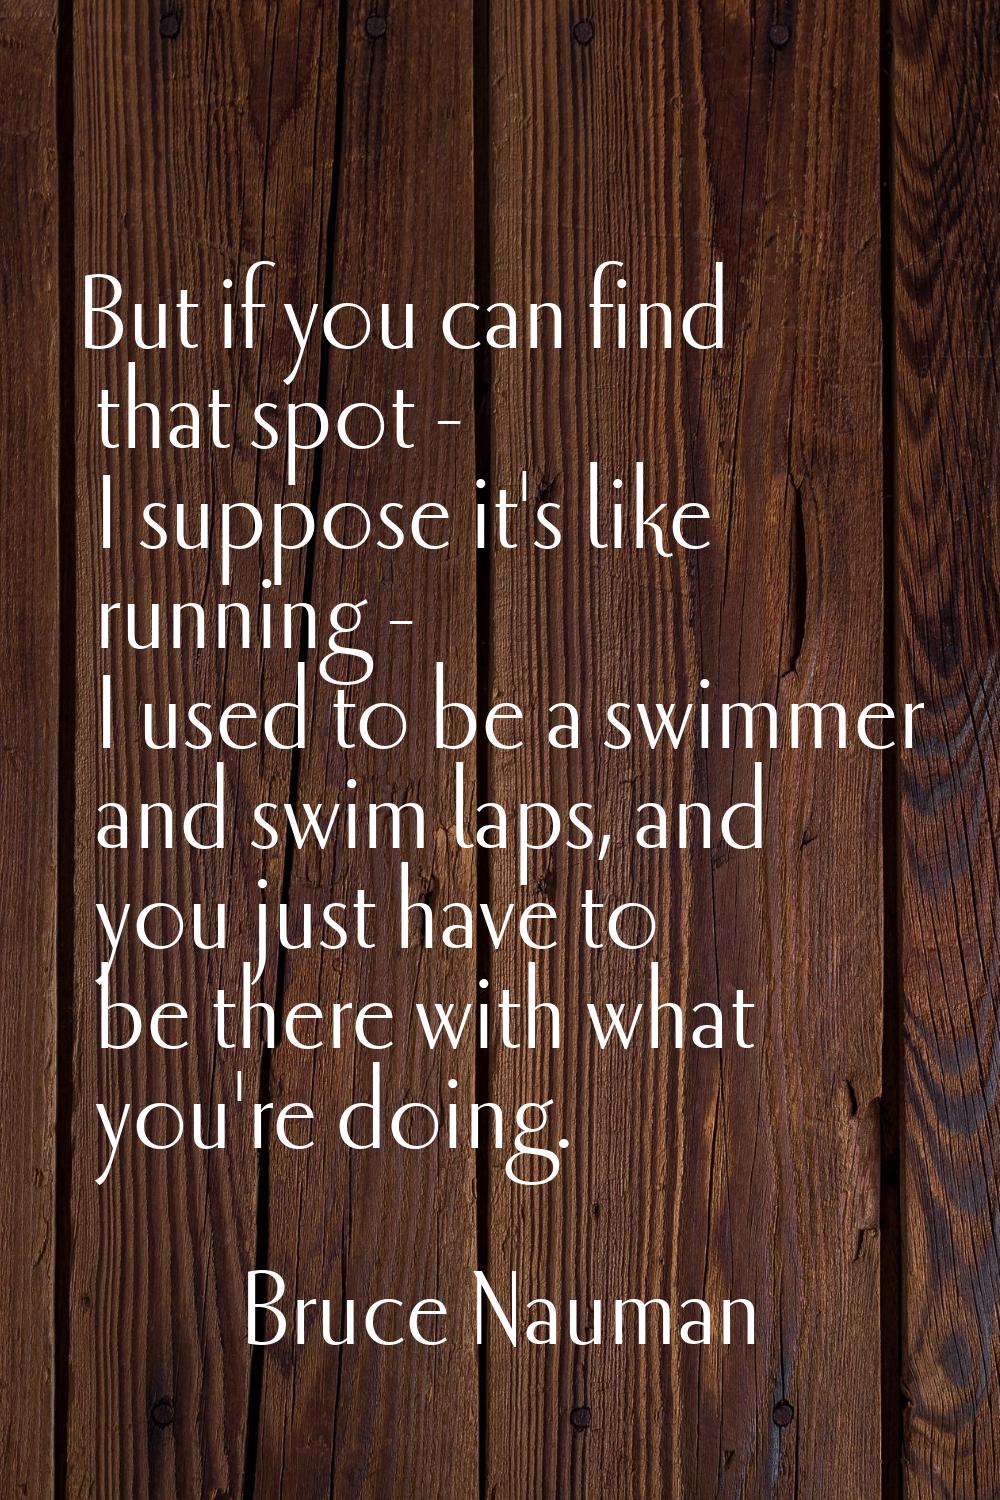 But if you can find that spot - I suppose it's like running - I used to be a swimmer and swim laps,